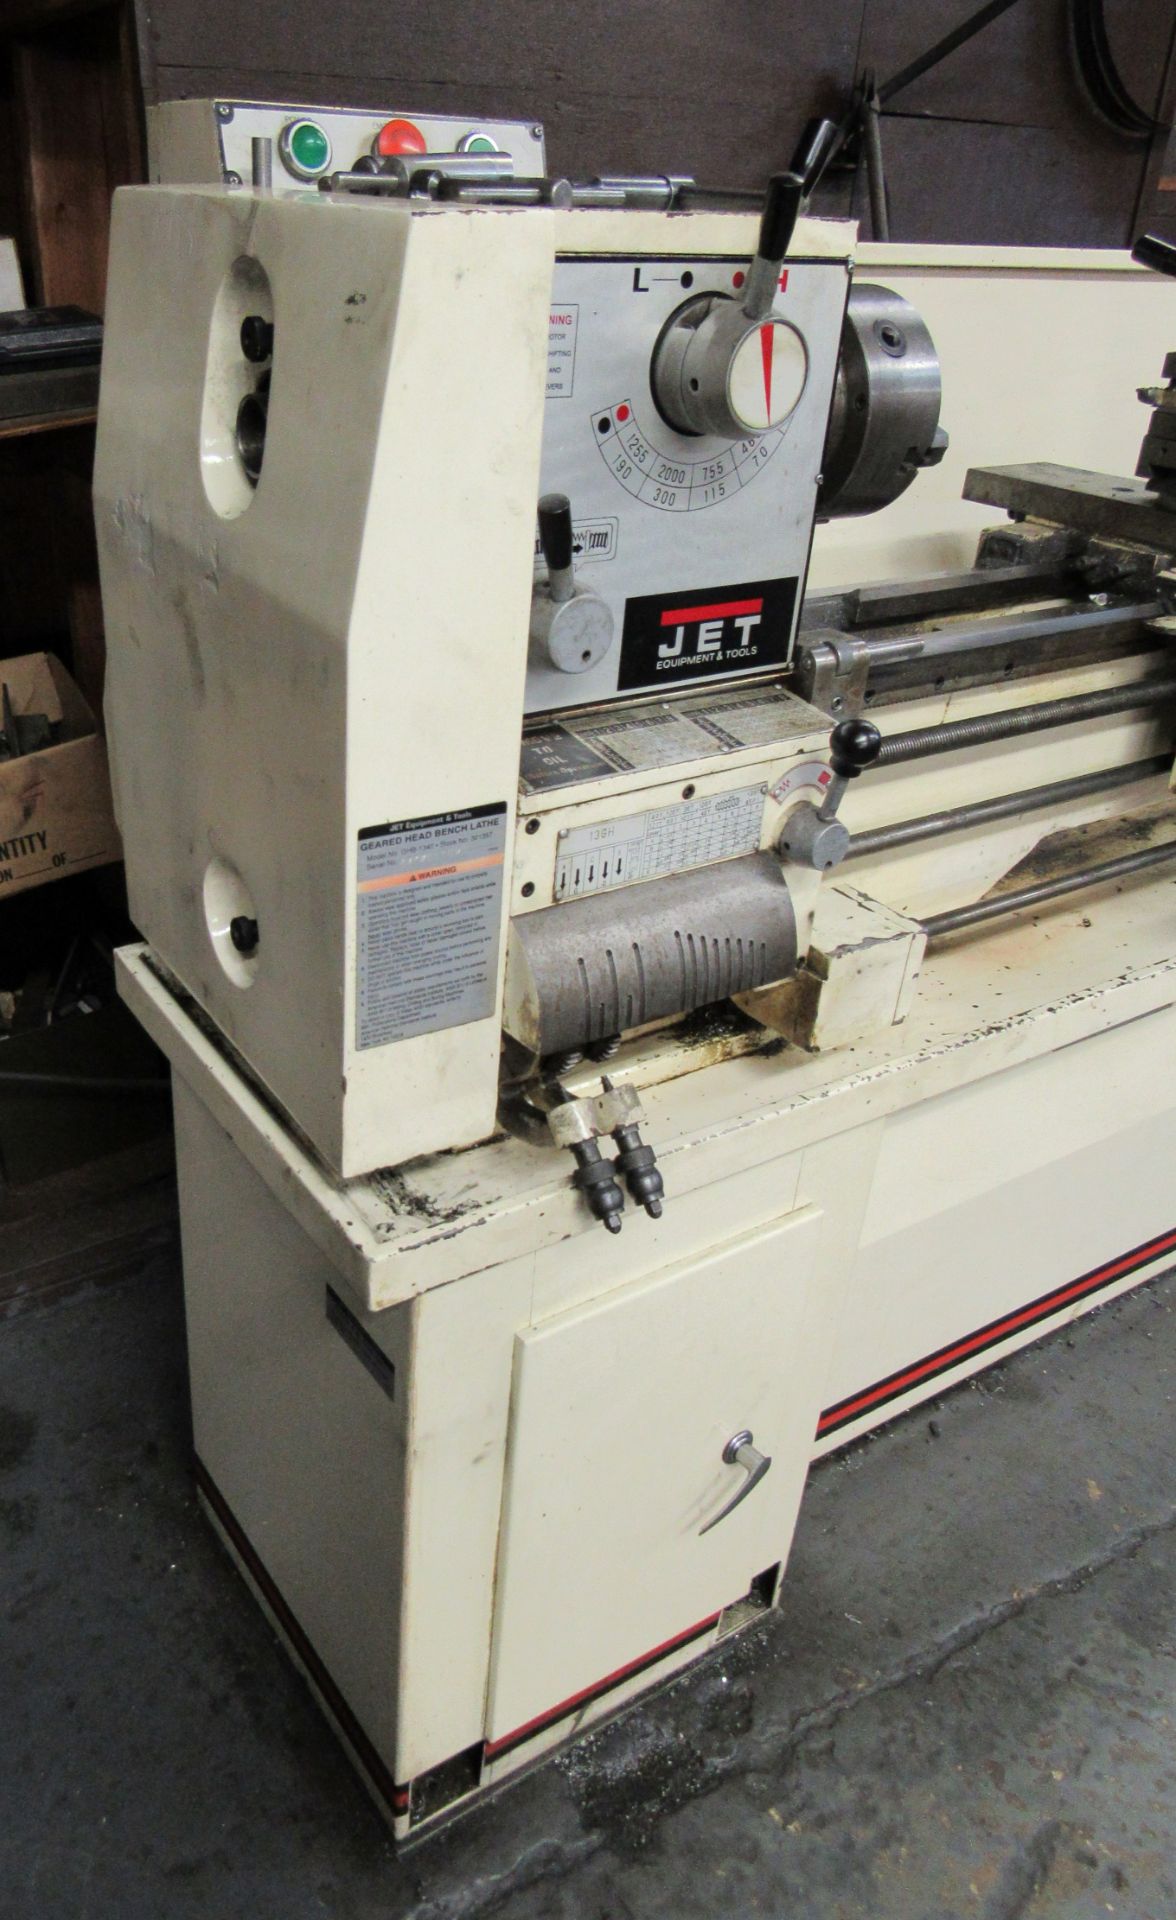 Jet Mod.GHB-1340 13"/18" x 40" Geared Gap Lathe - New 2000, Spindle Speeds 70 - 2000 RPM, 18-3/4" - Image 4 of 5